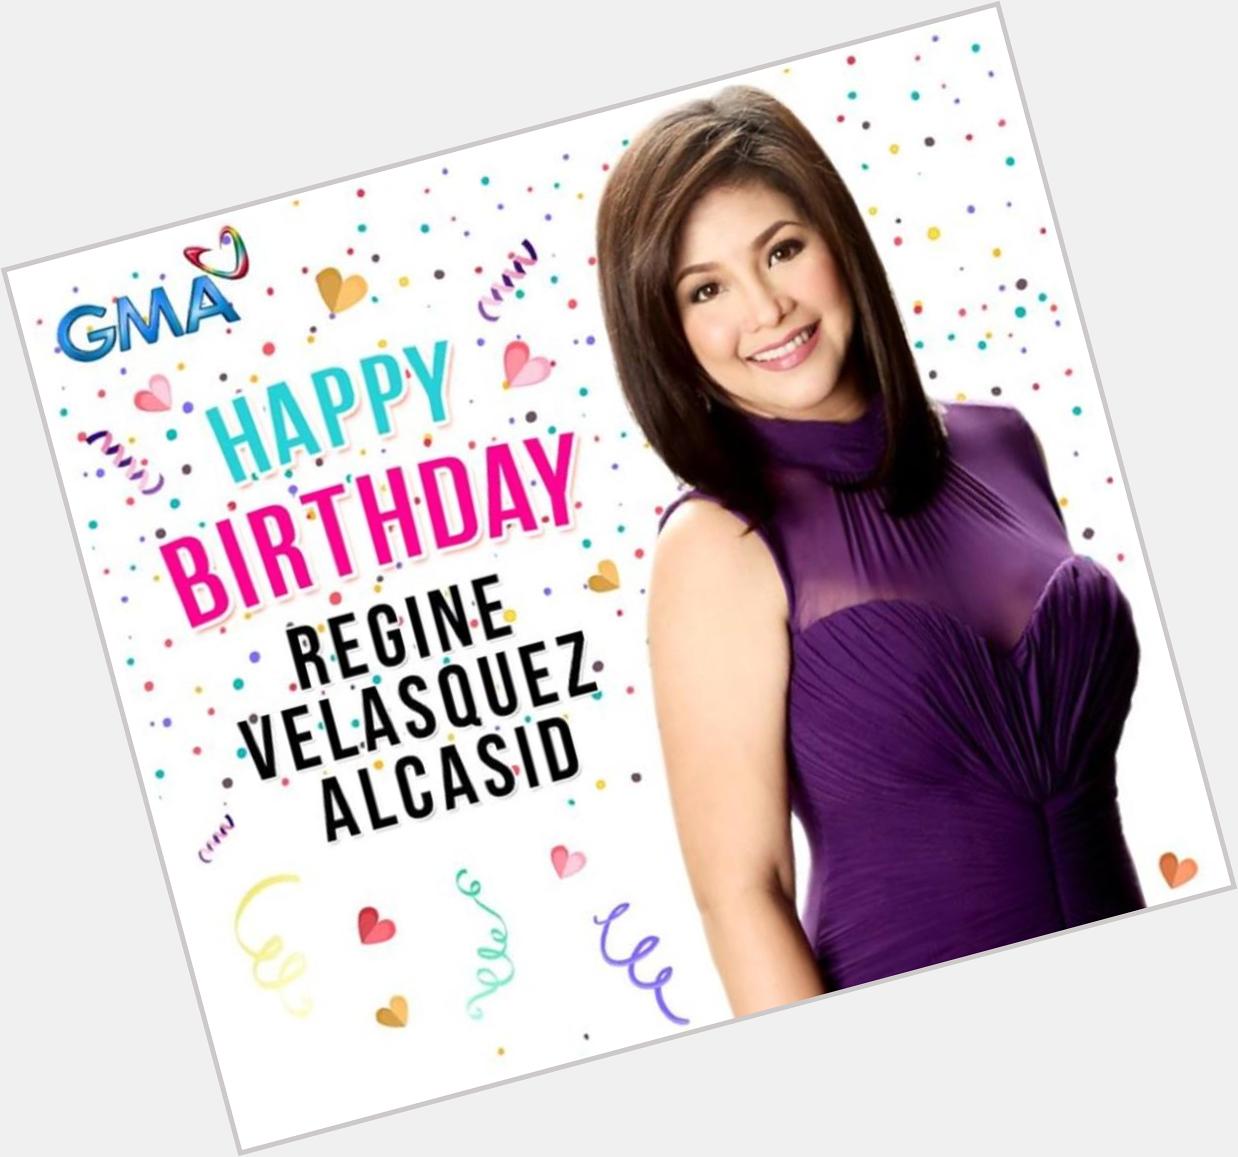 HAPPY BIRTHDAY to the one and the only ASIA\S SONGBIRD, REGINE VELASQUEZ! Stay blessed! 